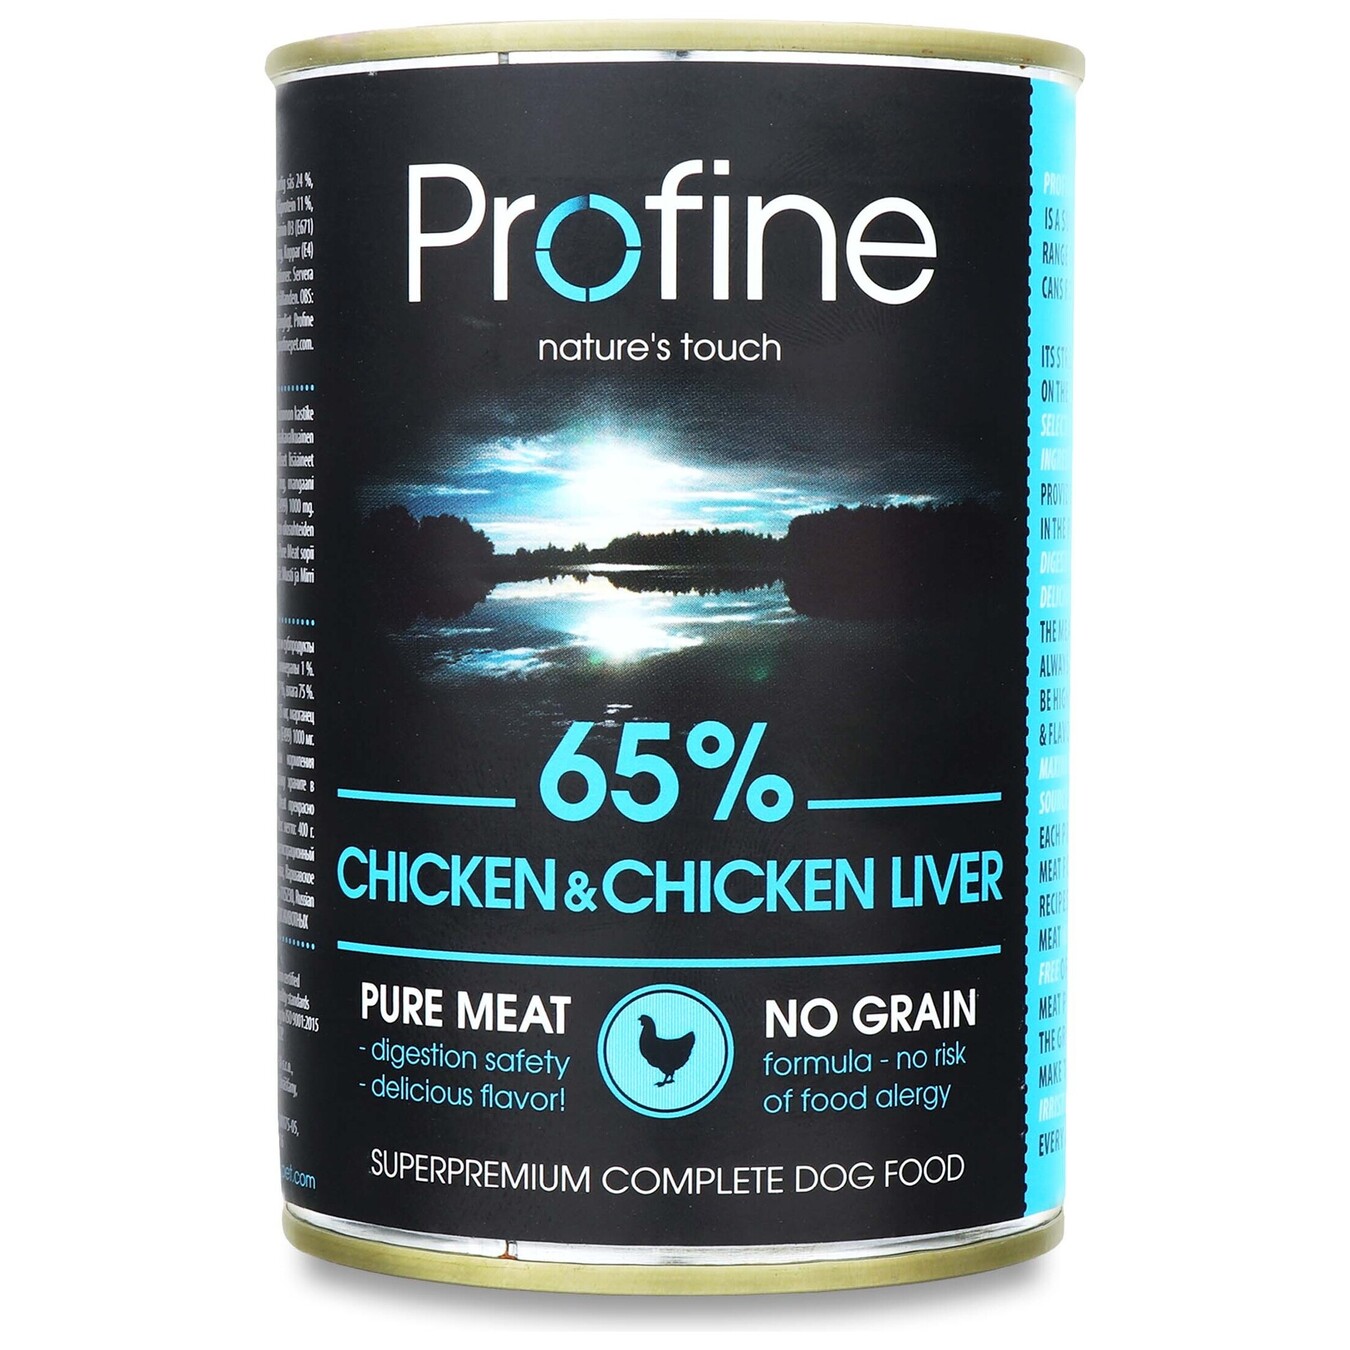 Profine canned food with chicken and chicken liver for dogs 400g